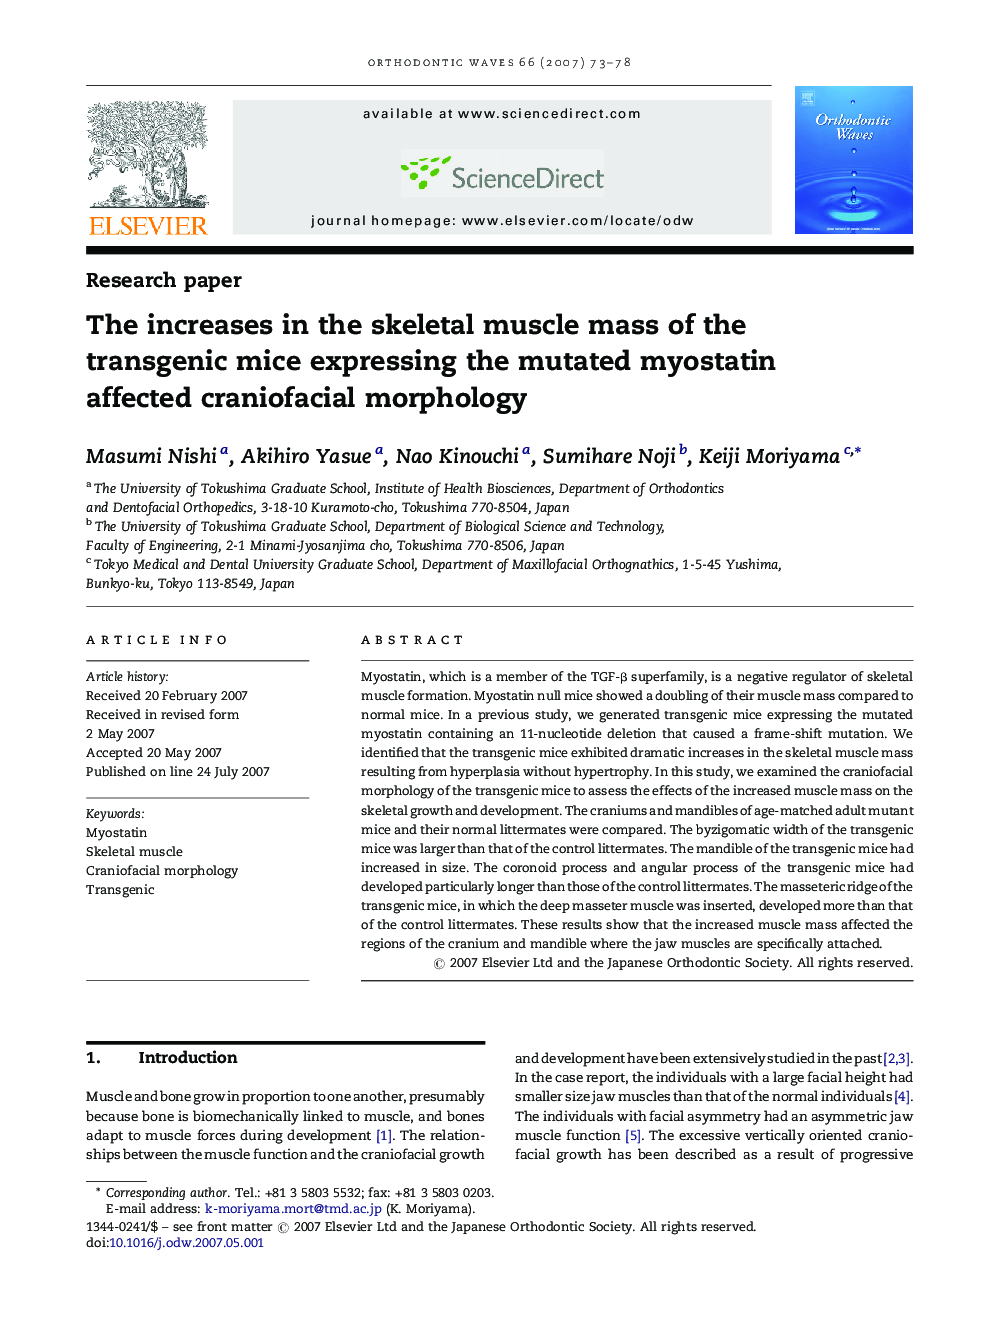 The increases in the skeletal muscle mass of the transgenic mice expressing the mutated myostatin affected craniofacial morphology